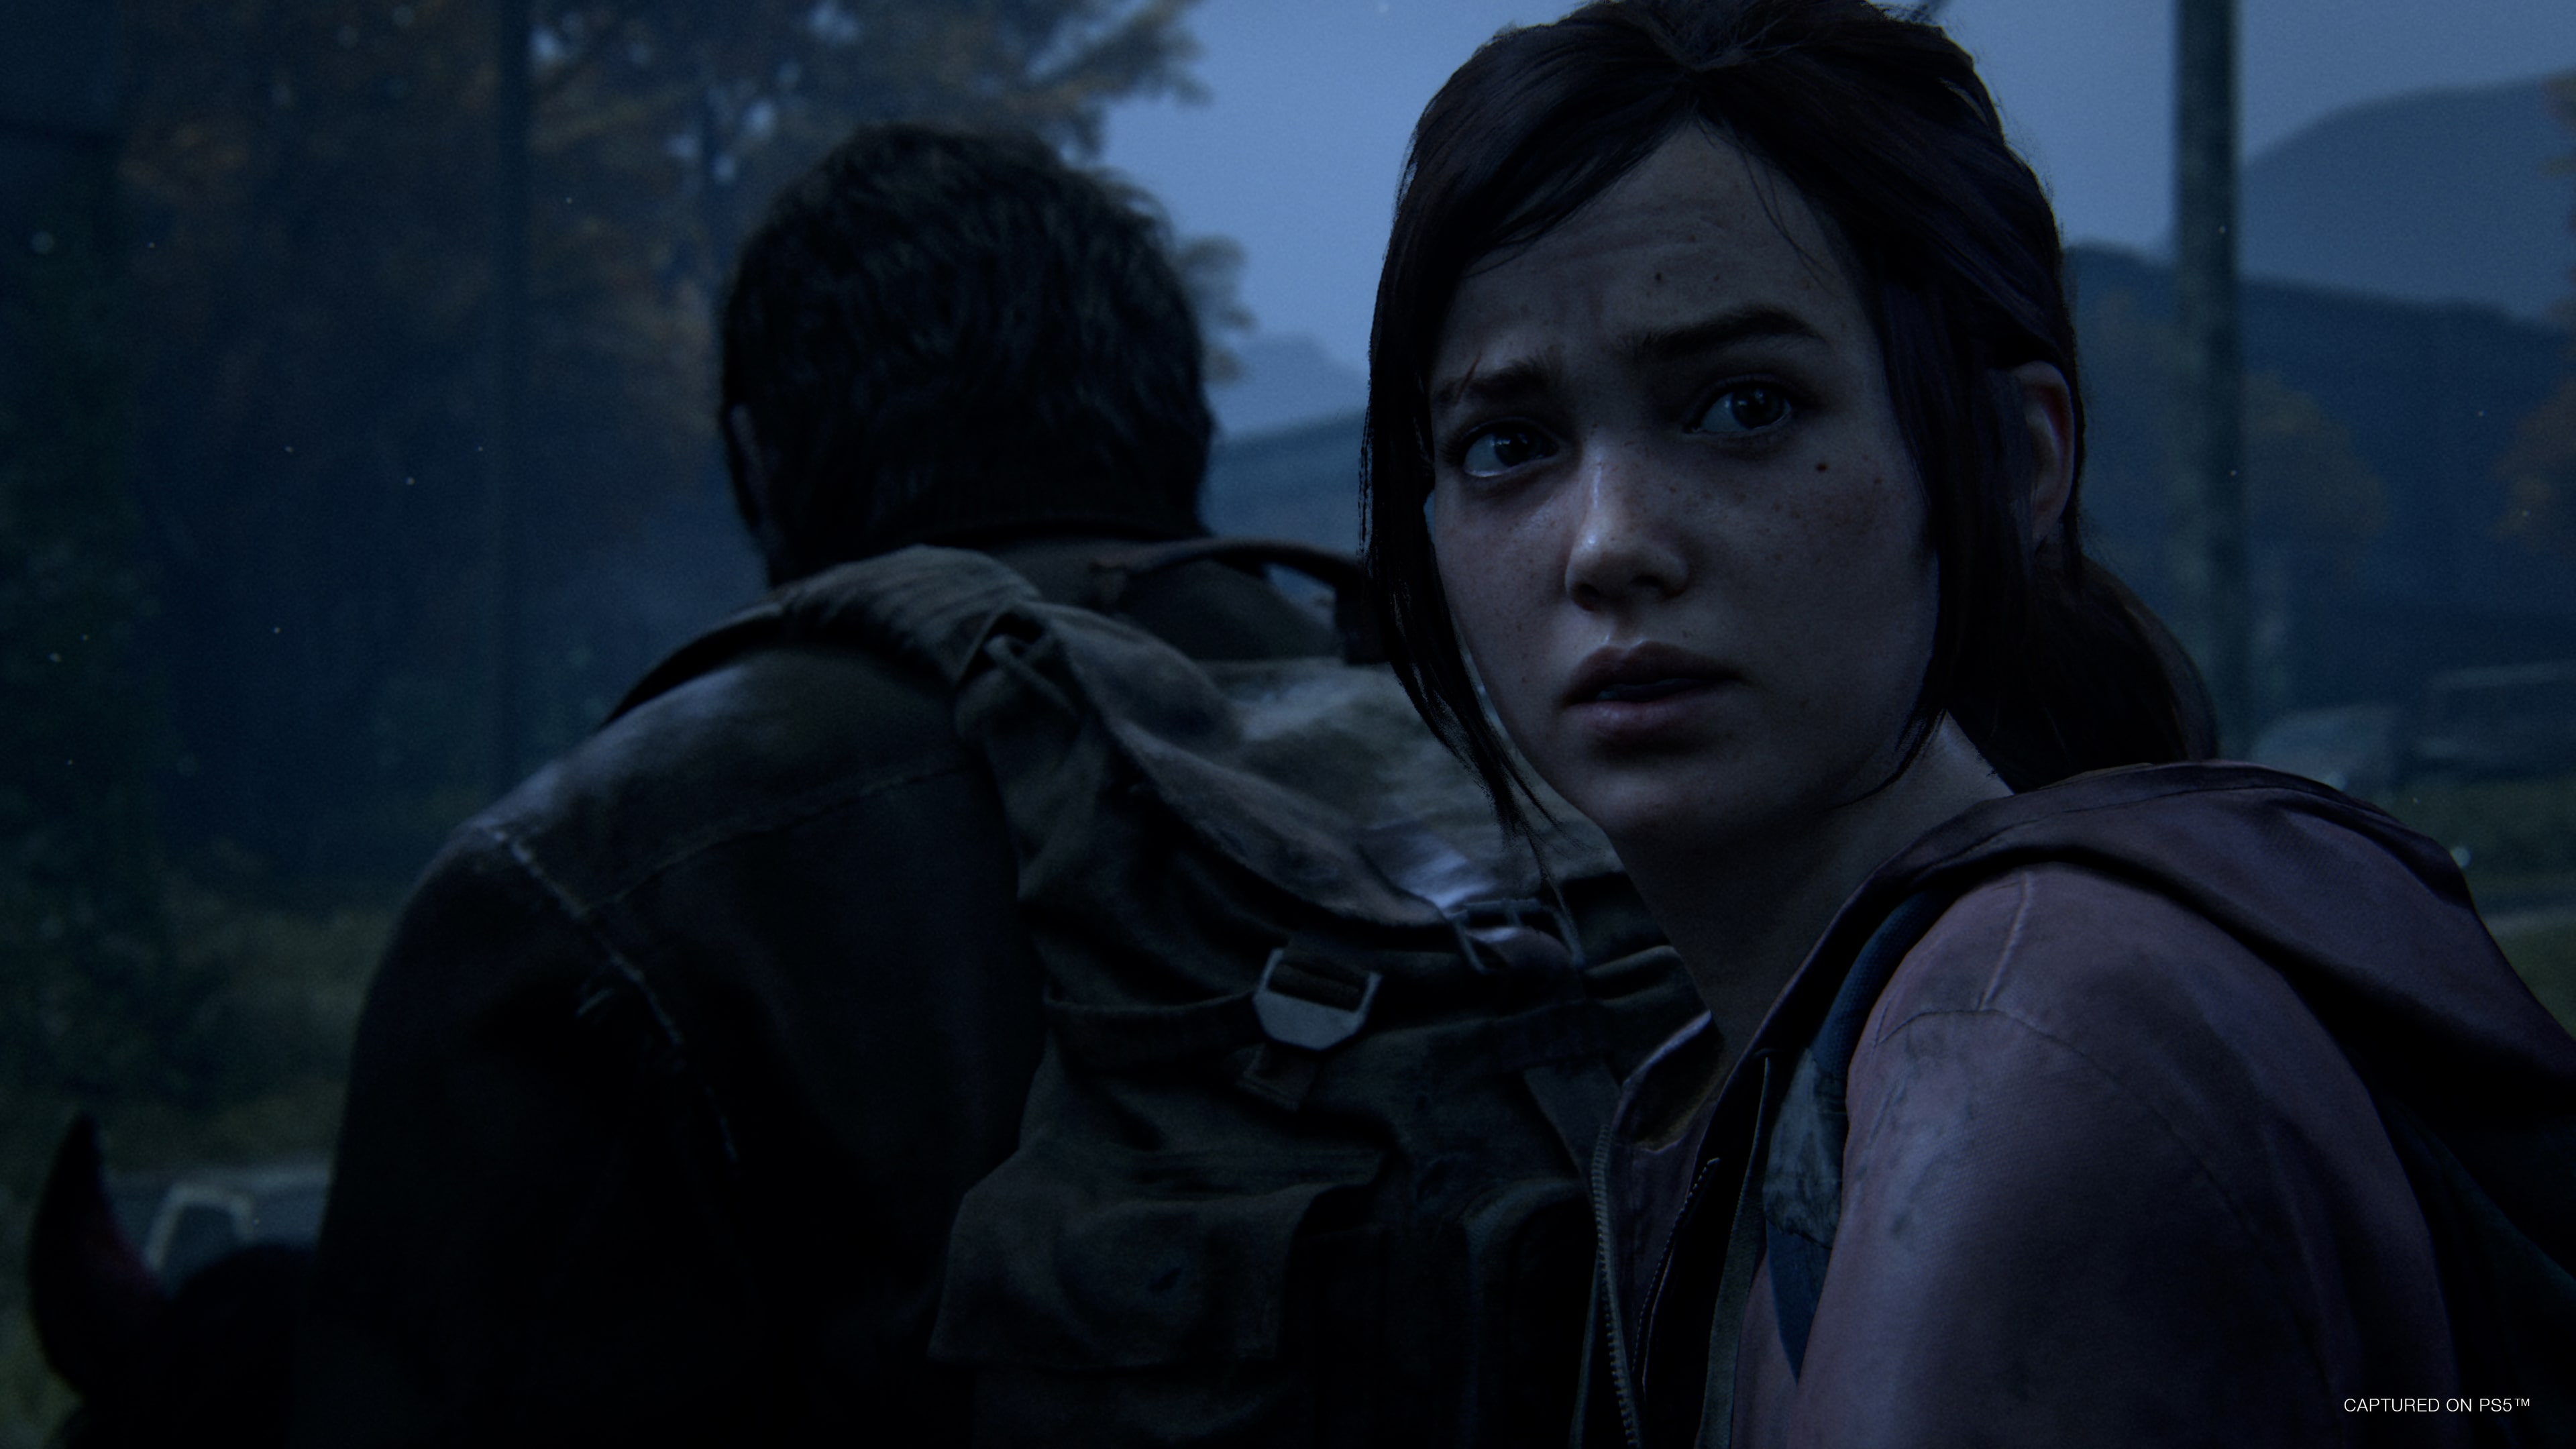 The Last of Us Part 1 Game Trial is available now for PlayStation Plus  Deluxe subscribers - Explosion Network